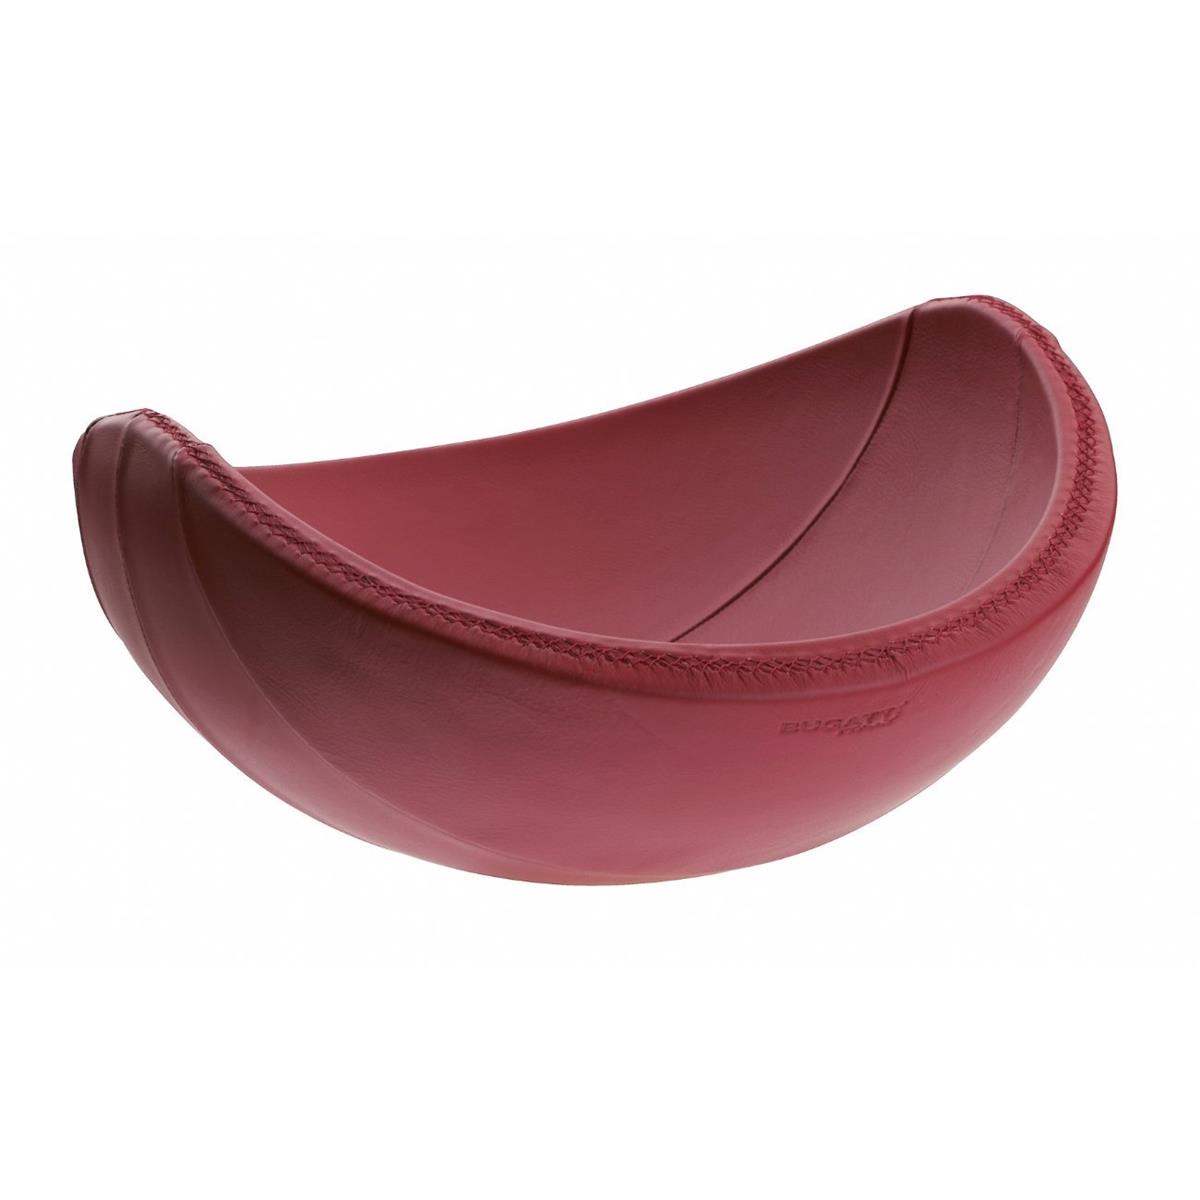 NINNAANNA Table Centerpiece - 100% RED Leather Upholstery